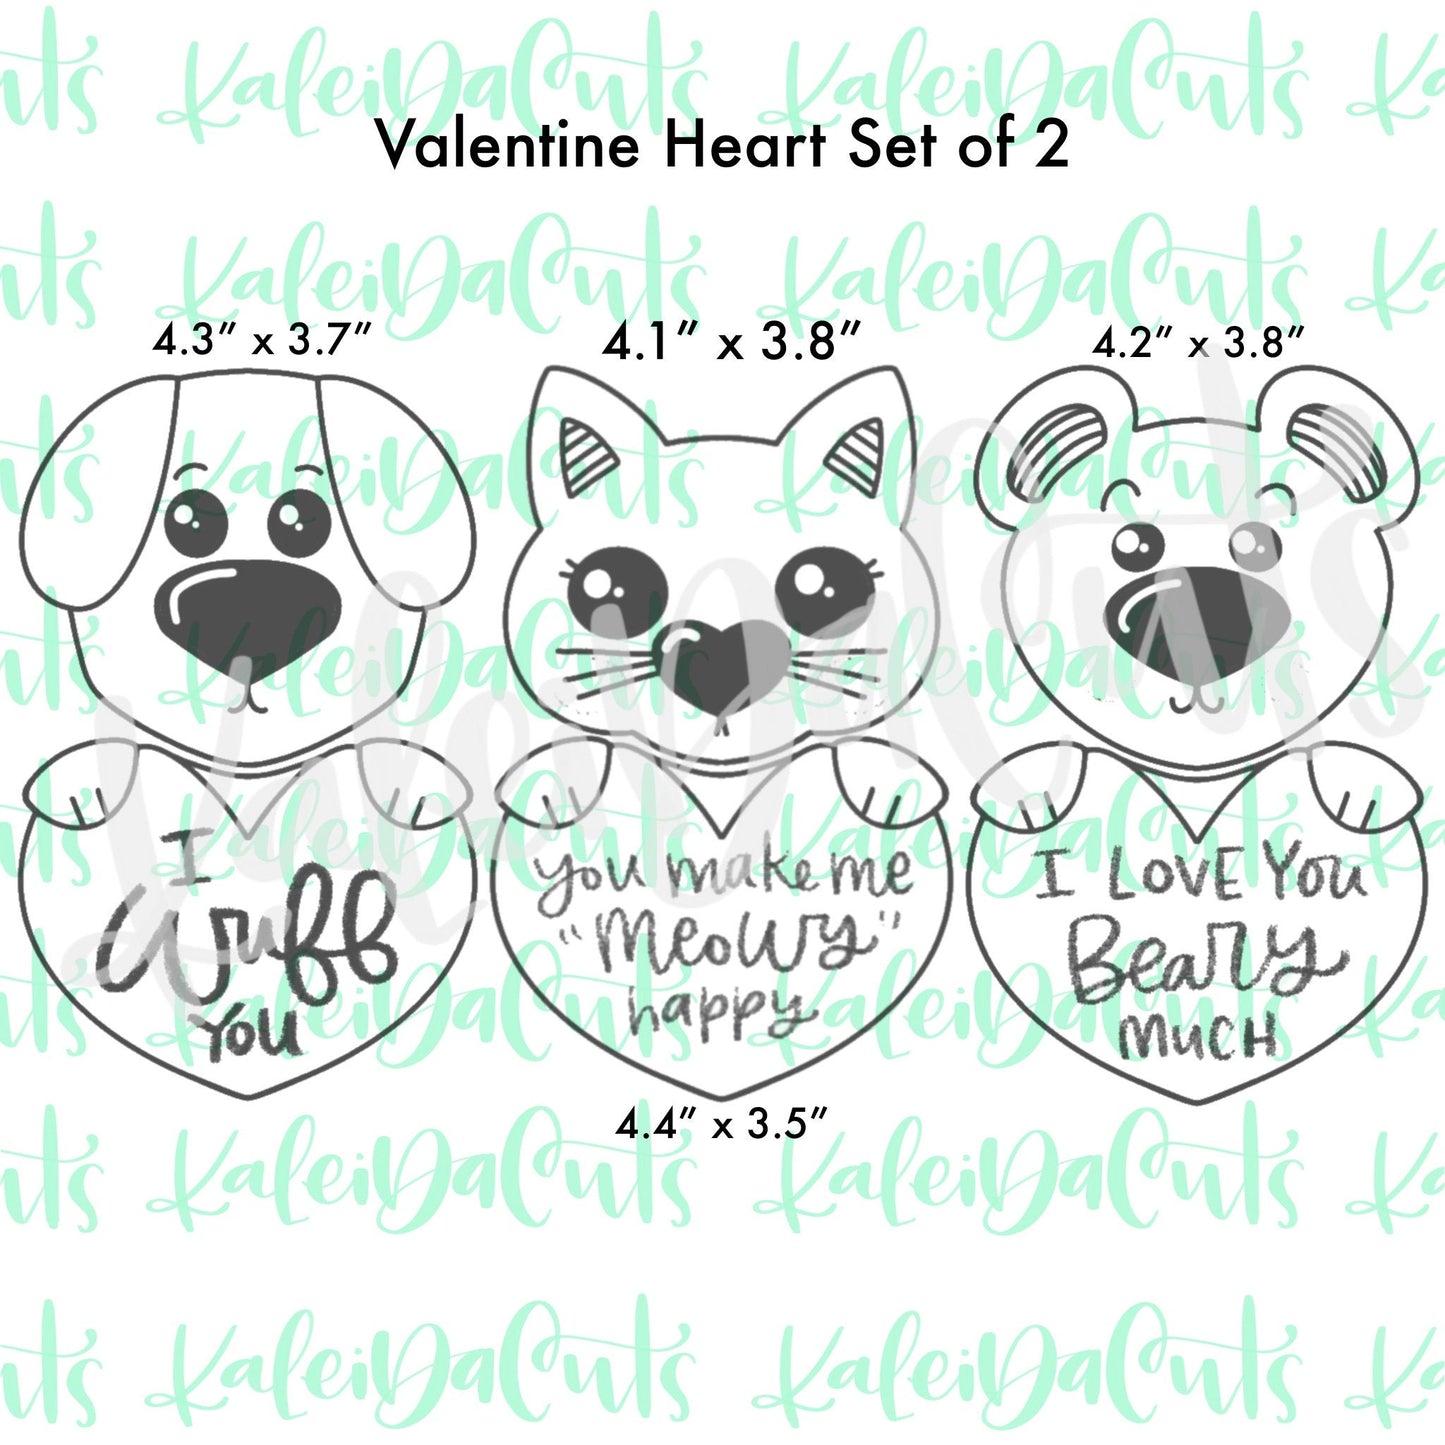 Valentine Heart Set - Build Your Own Character